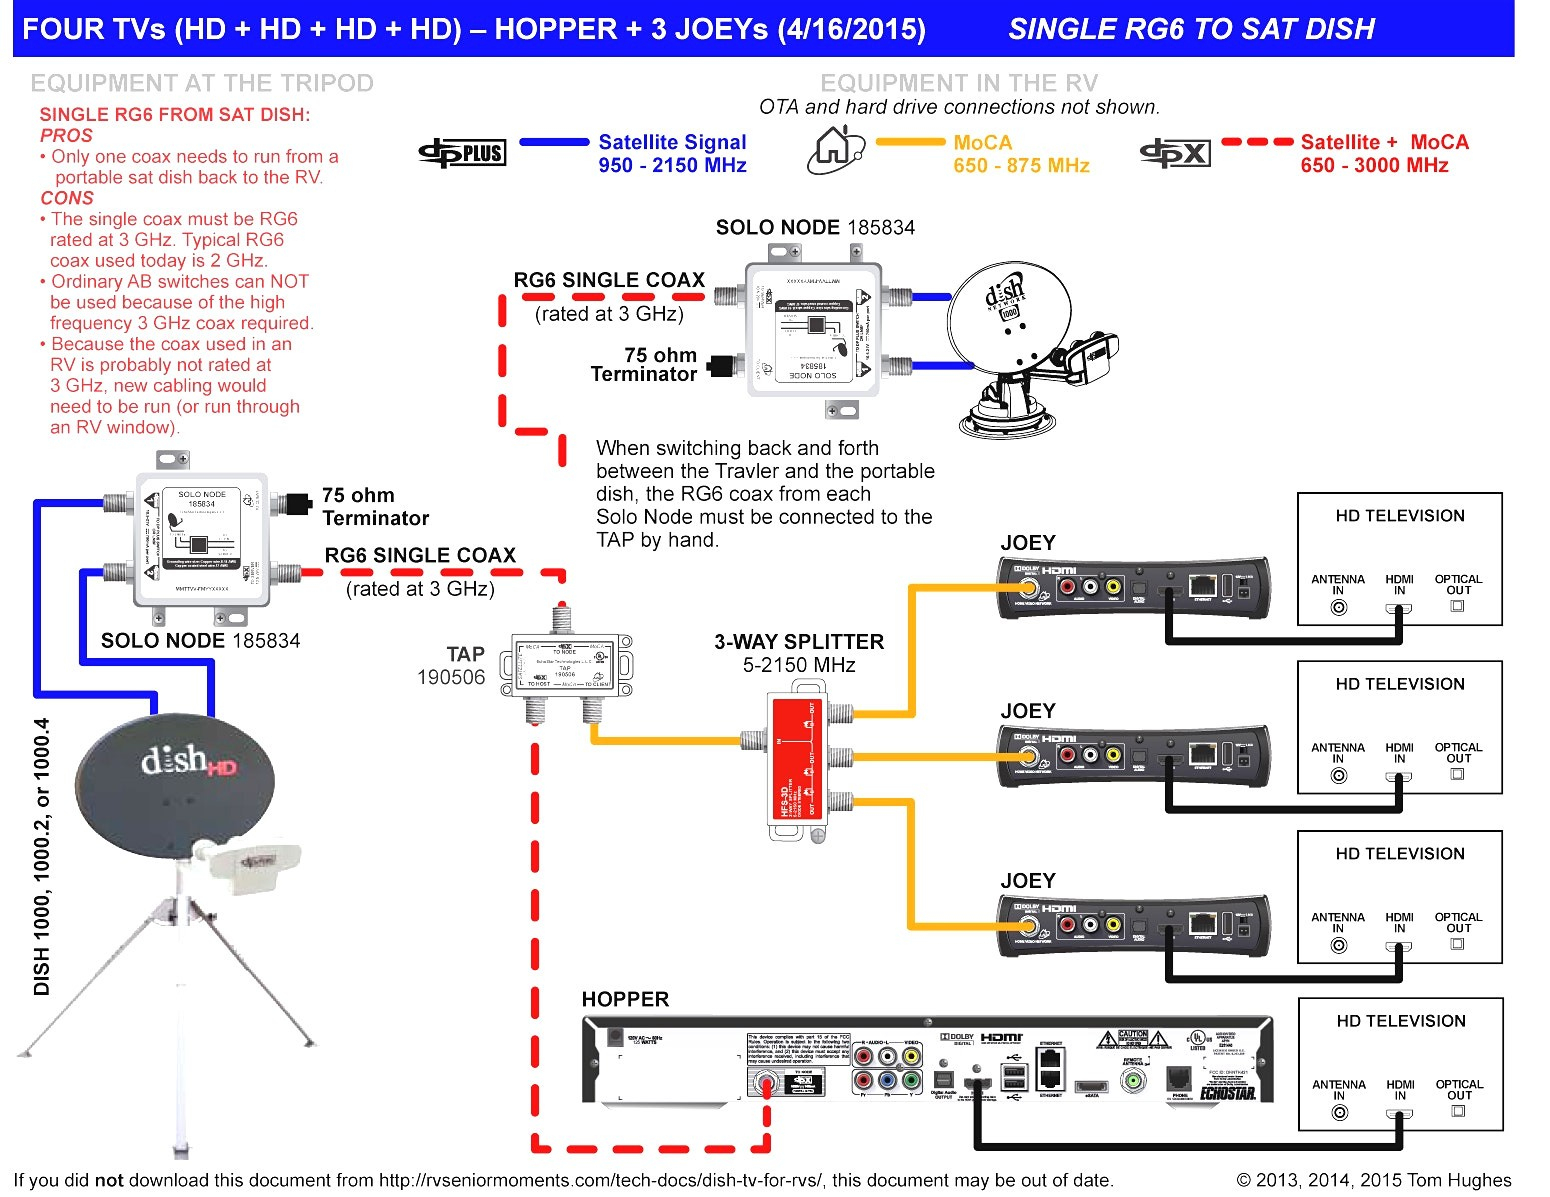 Wired Network Switch Diagram | Wiring Library - Dish Network Satellite Wiring Diagram